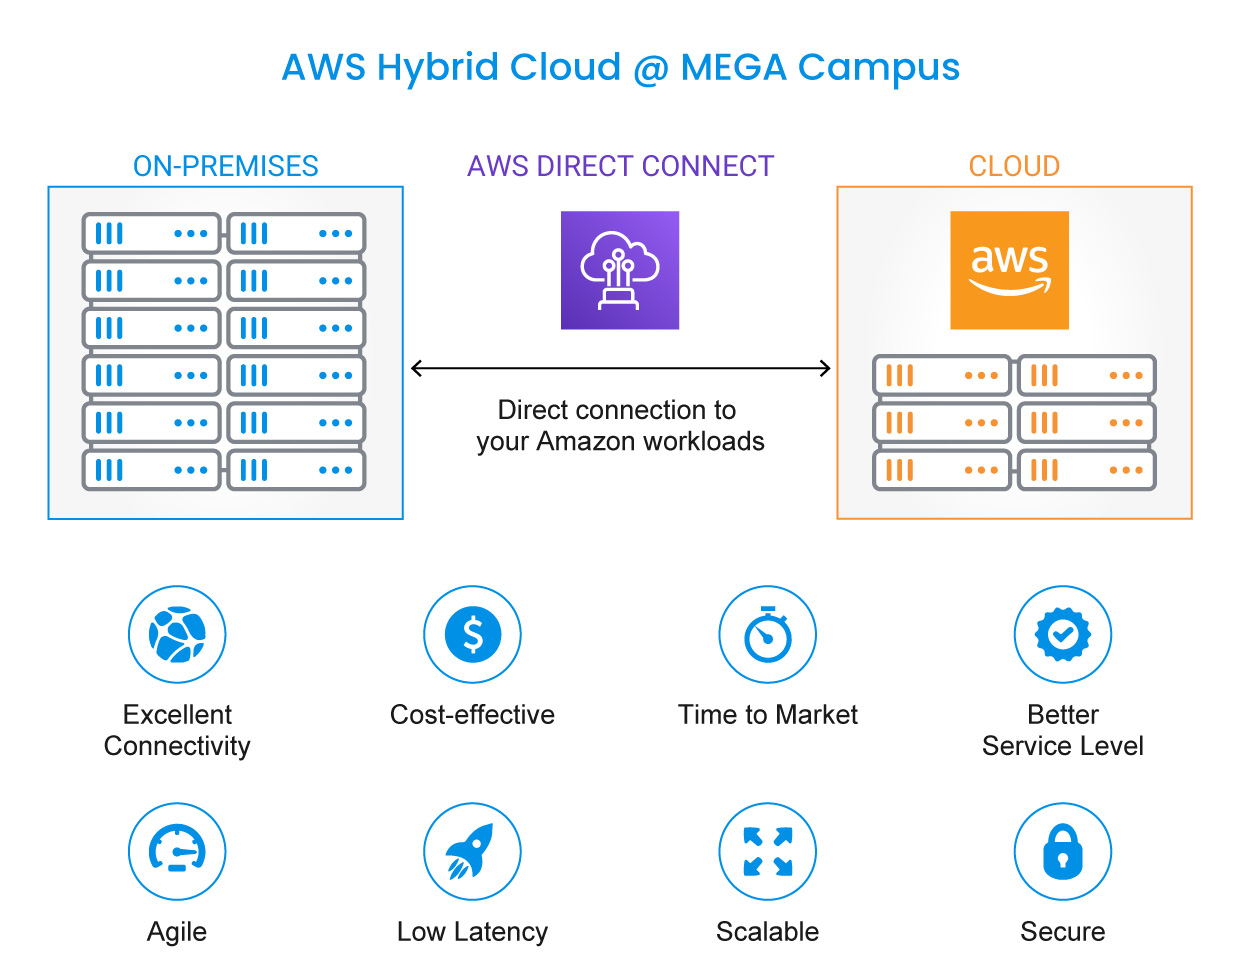 AWS Direct Connect at MEGA Campus - How it works